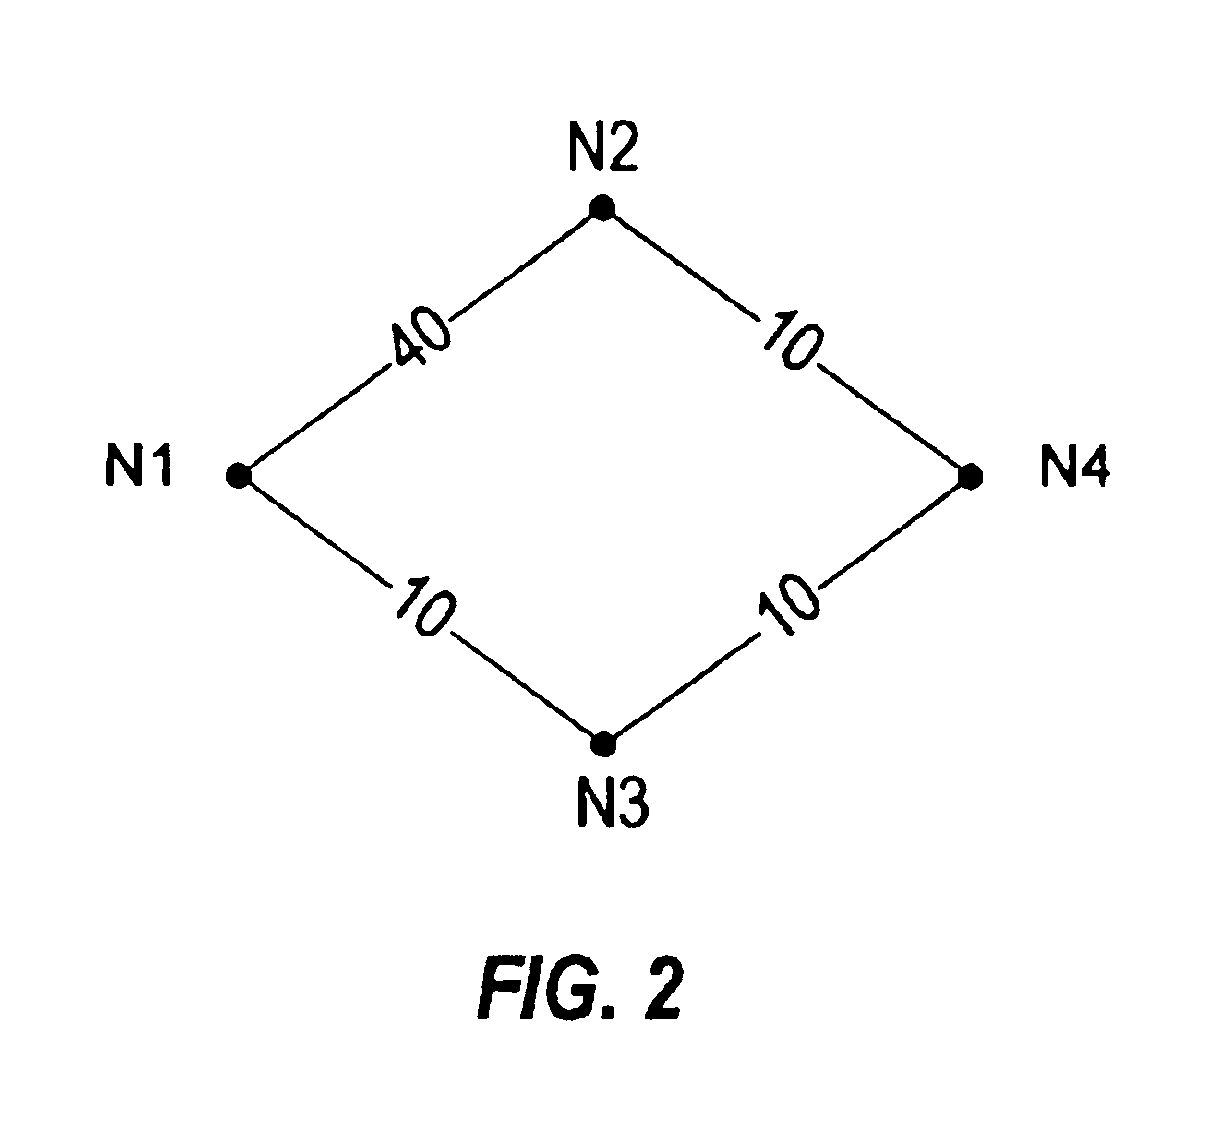 Method and apparatus for discovering edge-disjoint shortest path pairs during shortest path tree computation